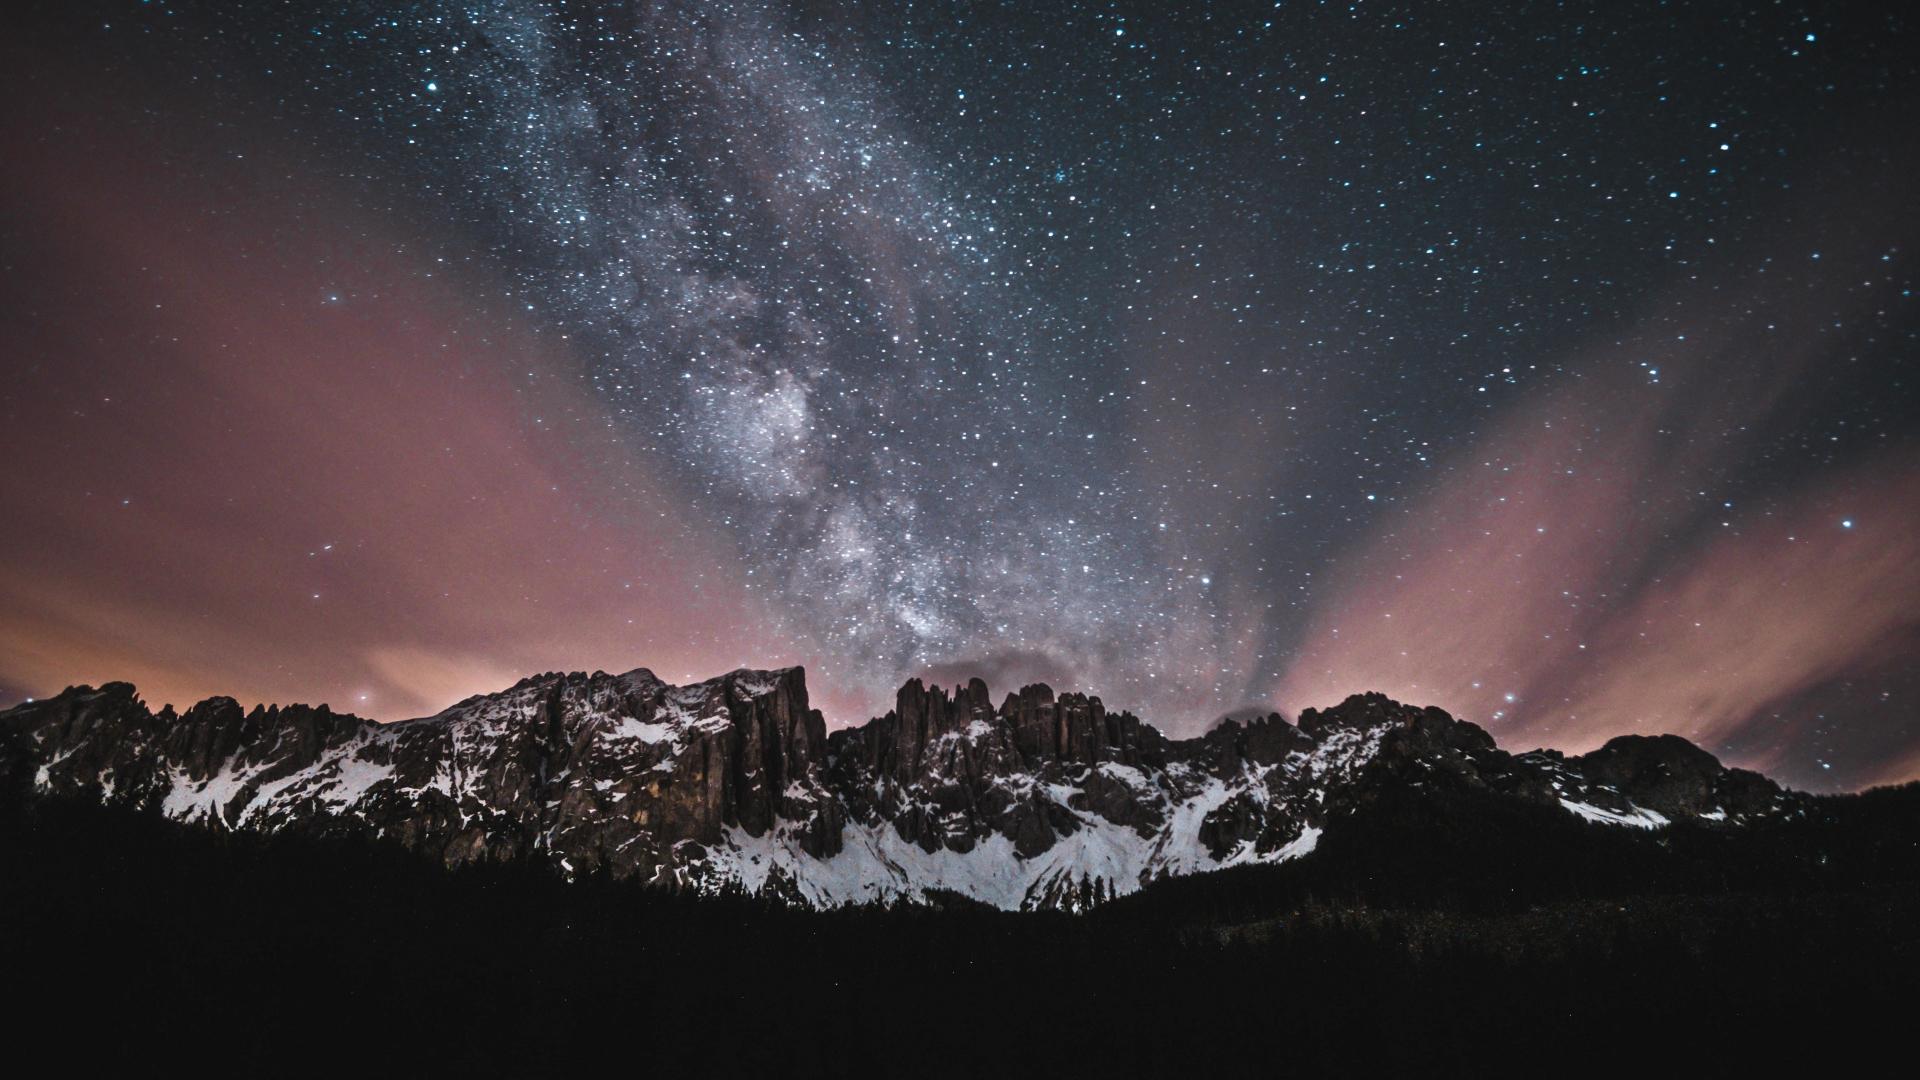 Download wallpaper 1920x1080 nature, mountains, starry sky, beautiful ...